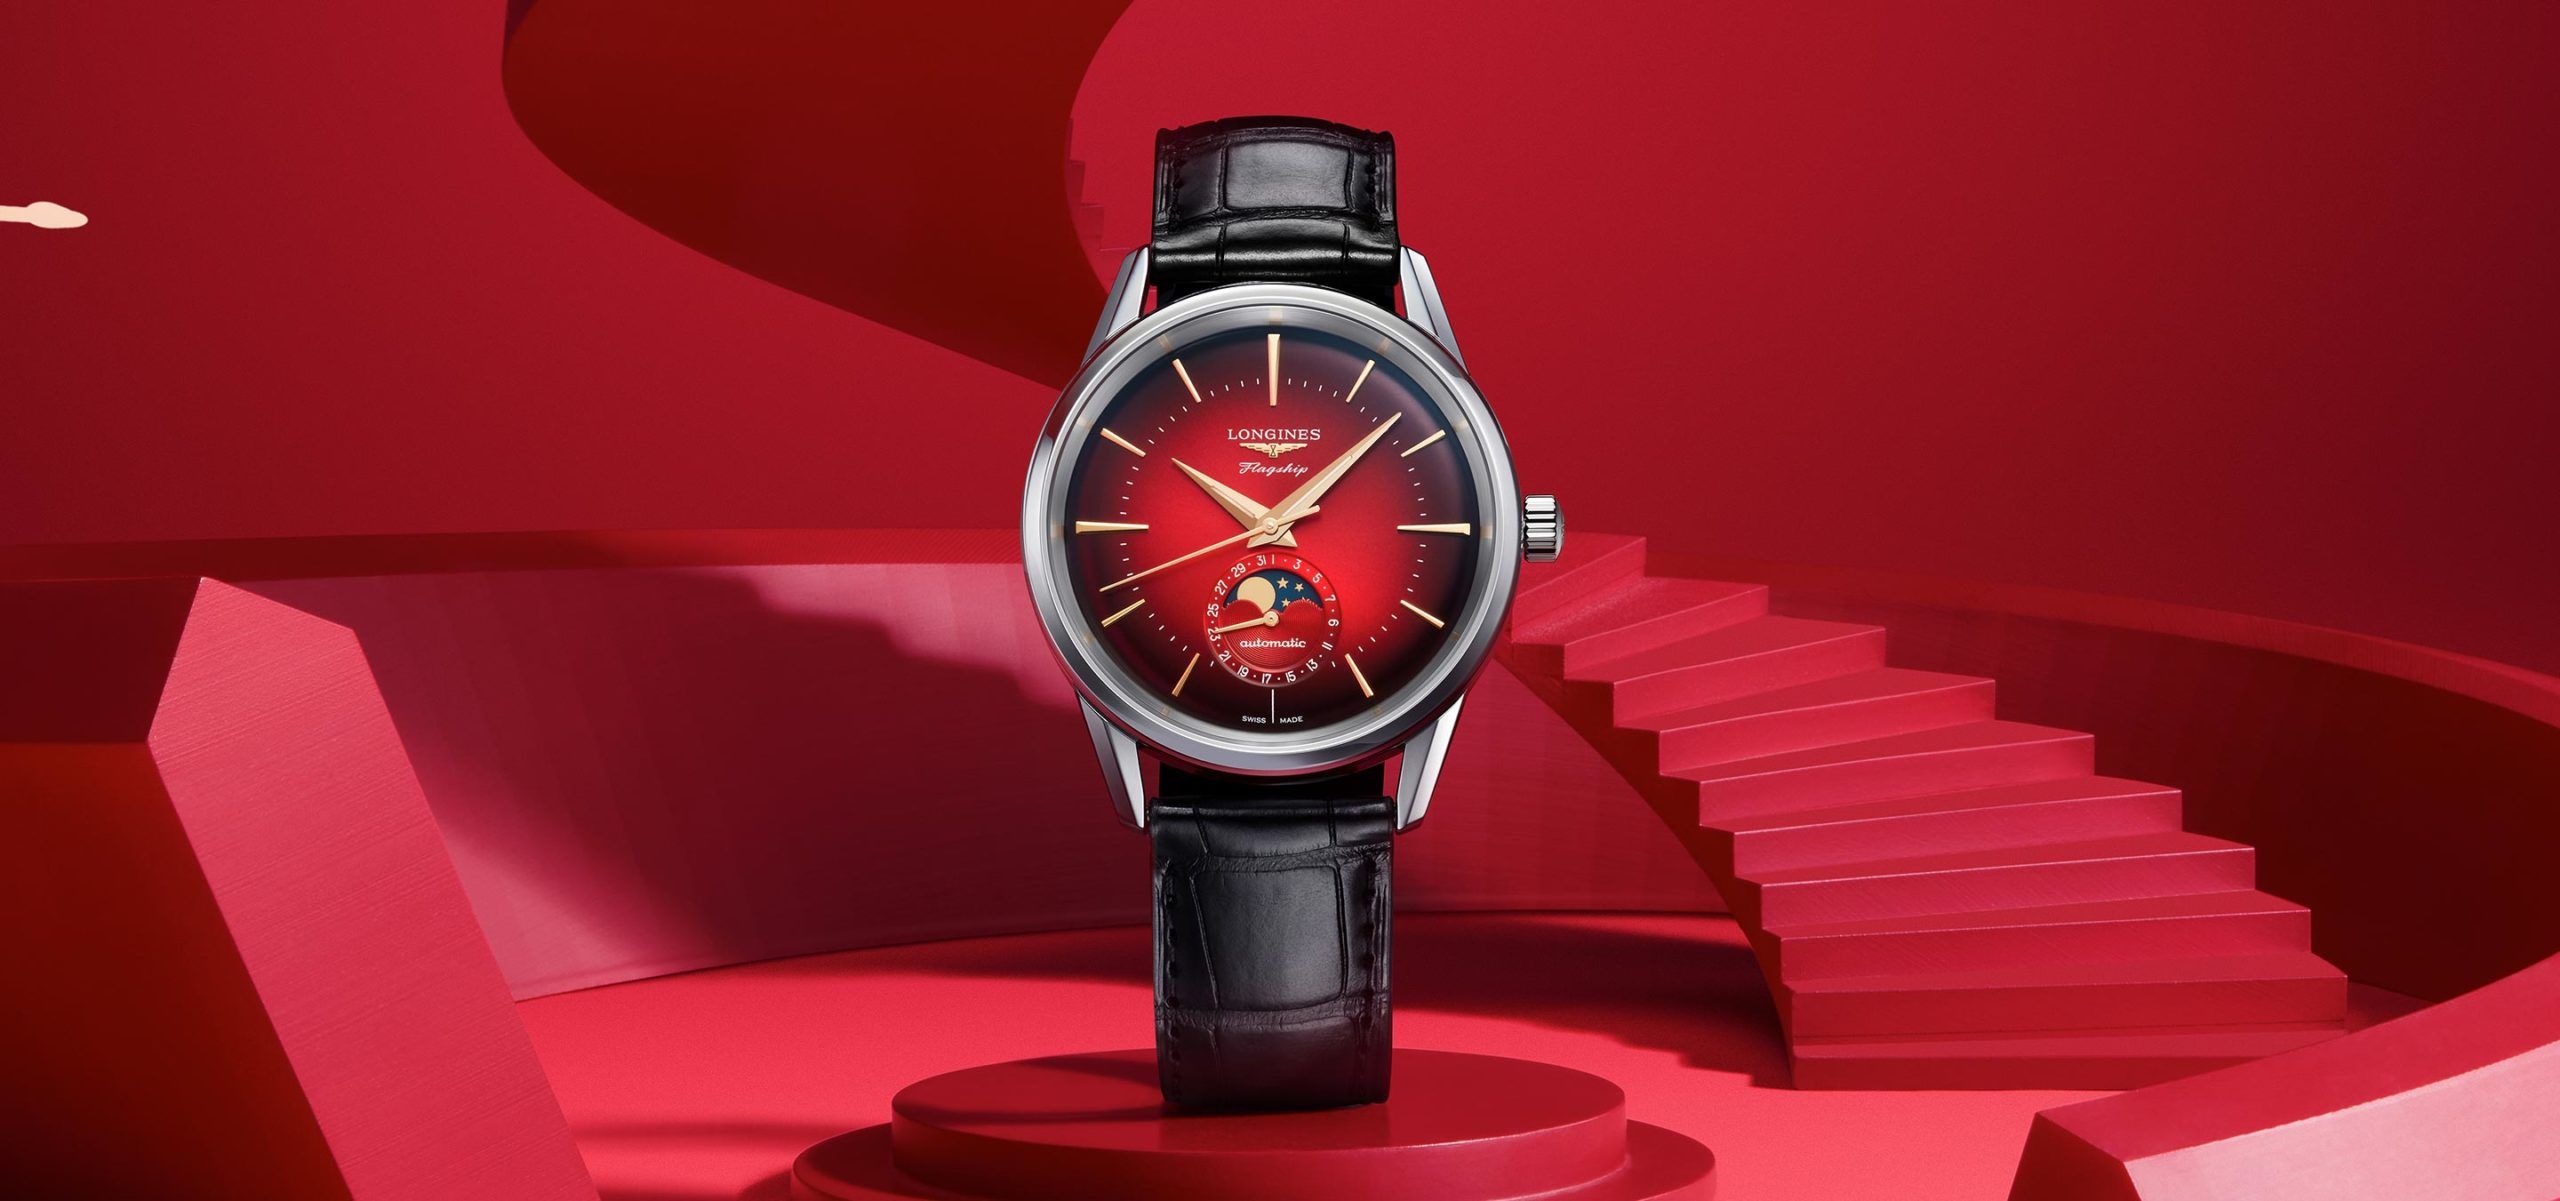 Of Myths, Auspicious Hues, And Endless Possibility: Introducing The Longines Flagship Heritage Year Of The Dragon Watch